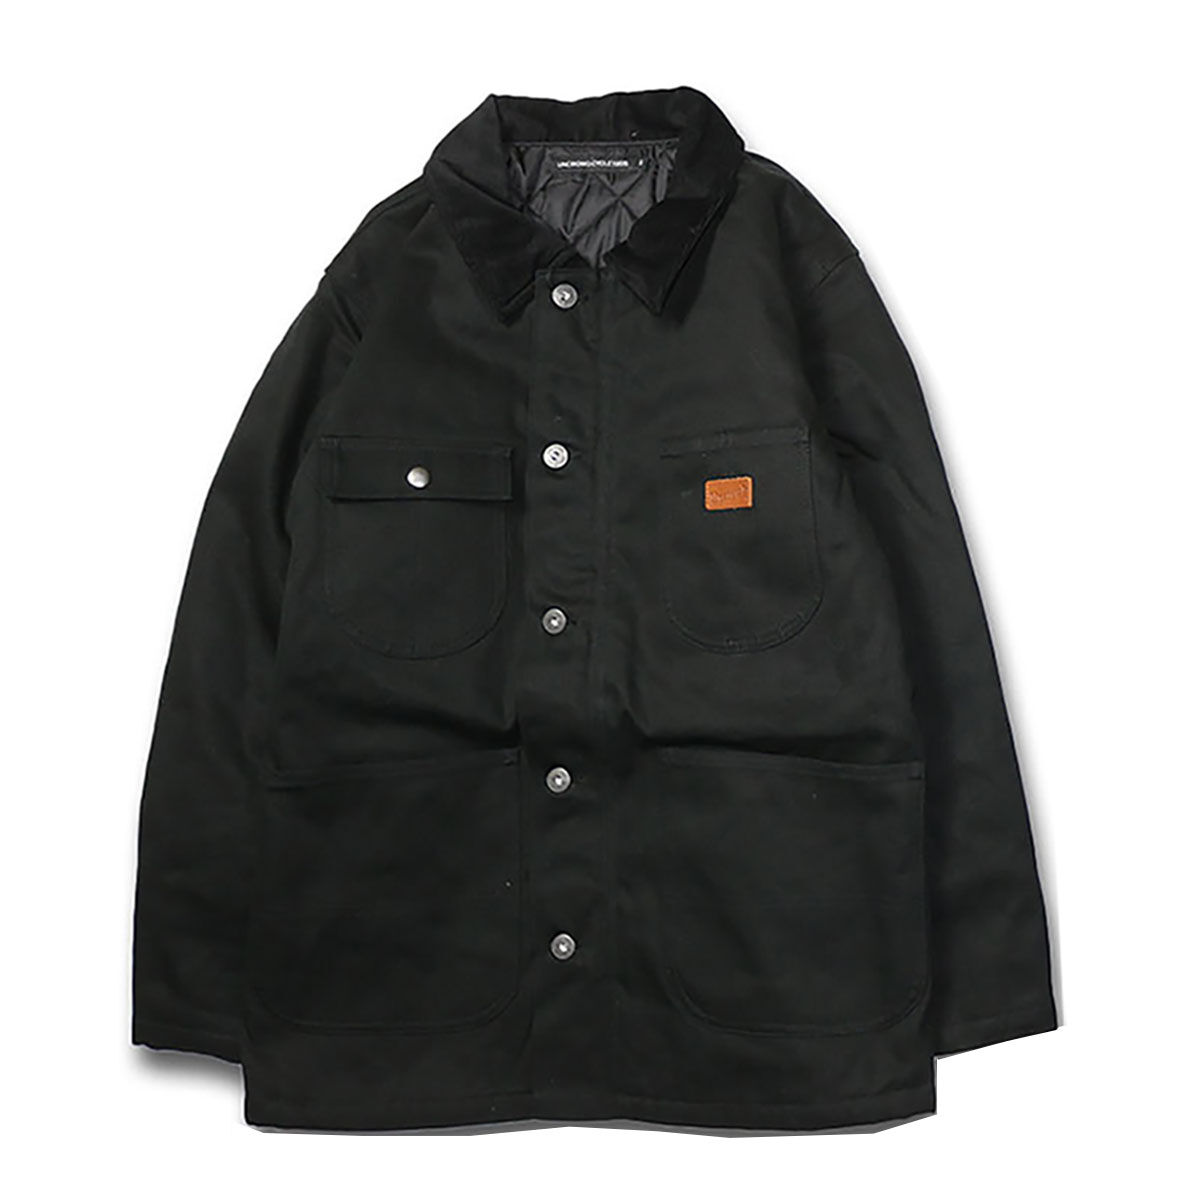 UNCROWD(アンクラウド) UC-412-022 DUCK COVERALL 2色(BLK/NVY)